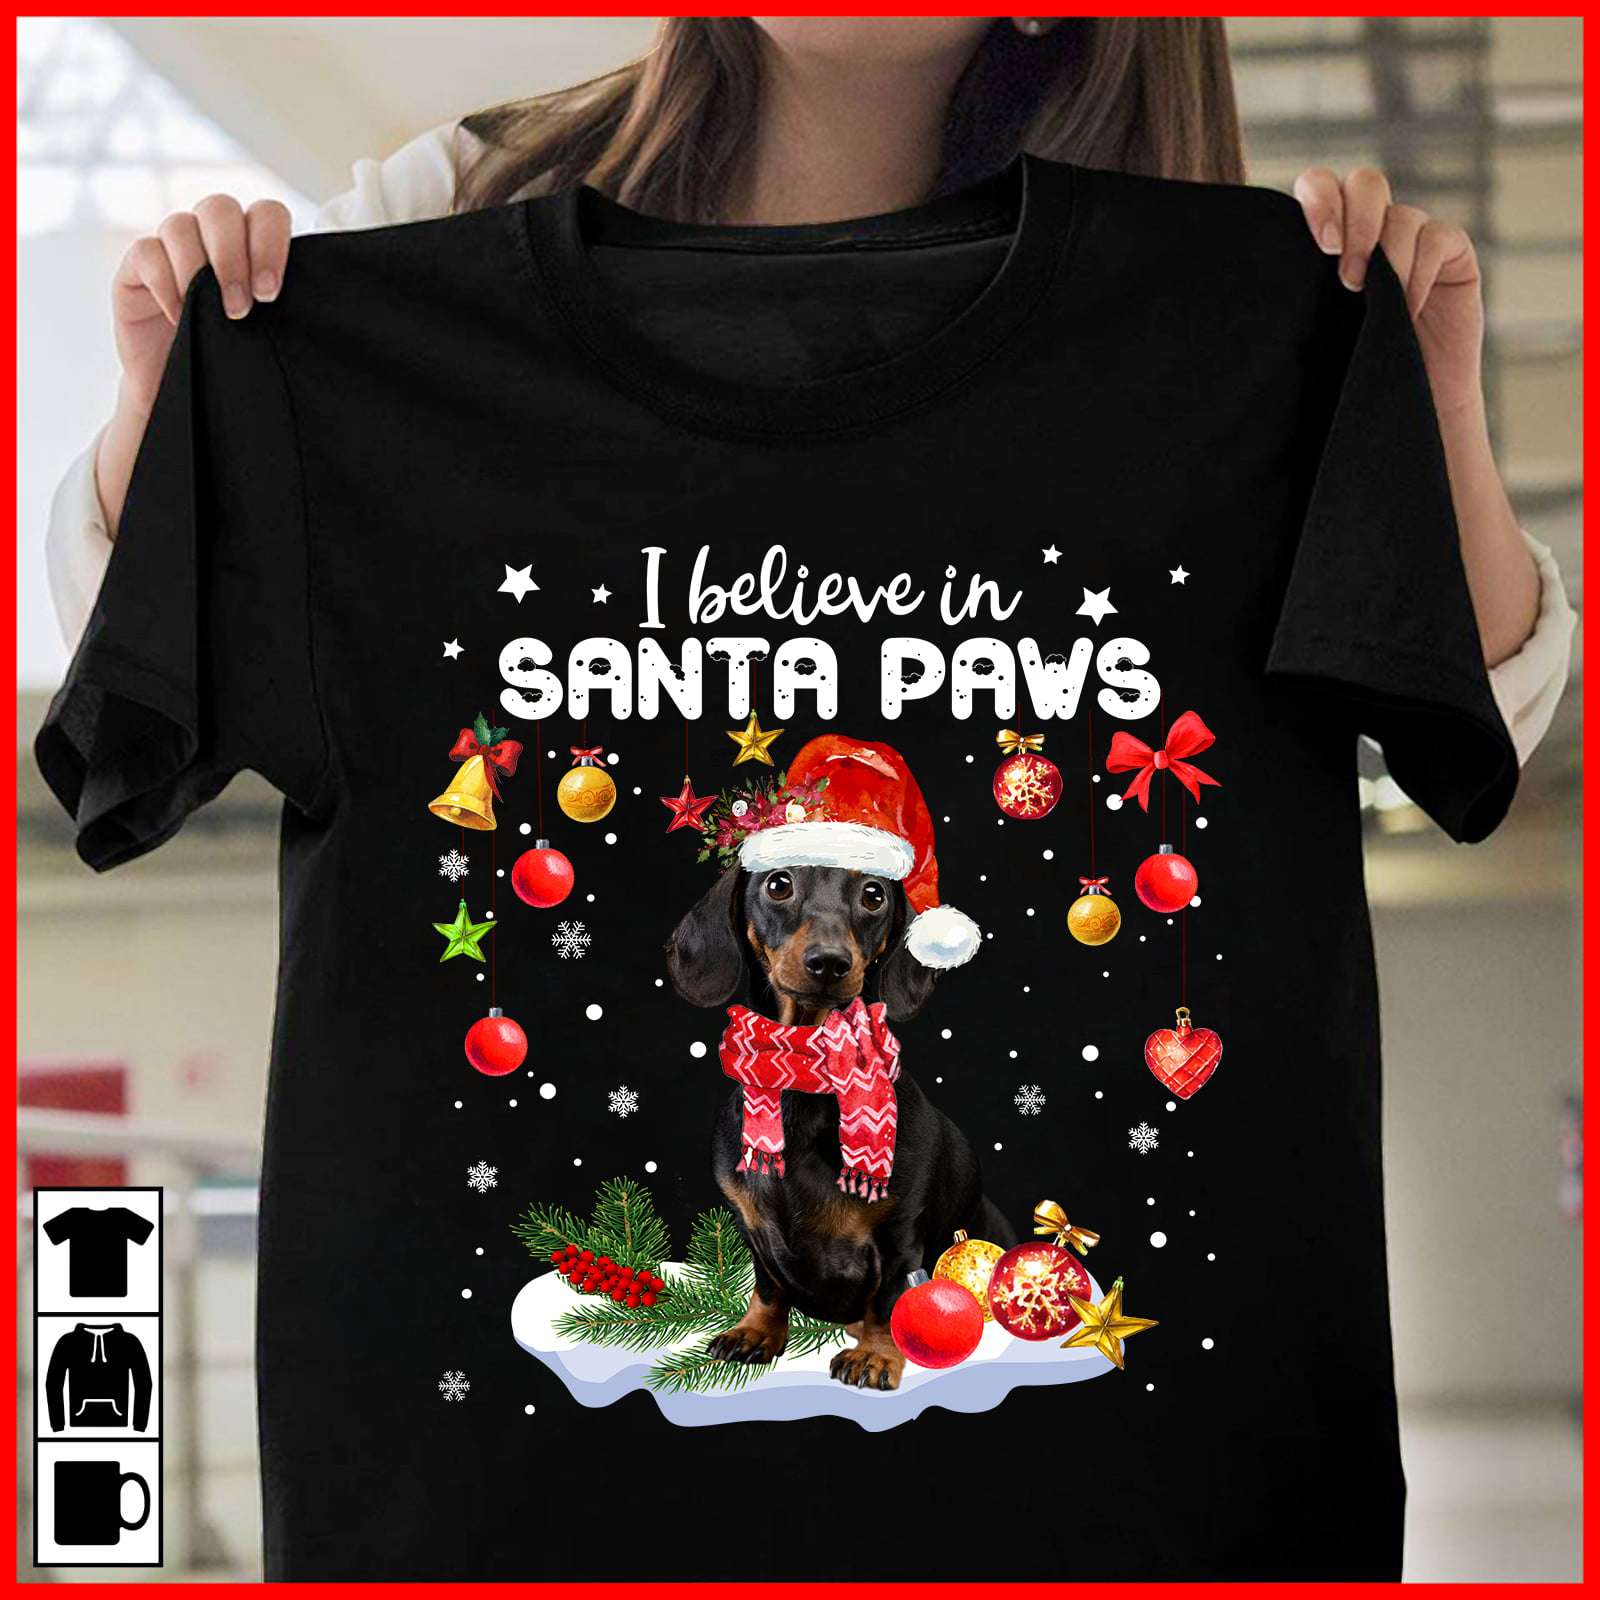 I believe in Santa paws - Santa claus and Dachshund, Merry Christmas